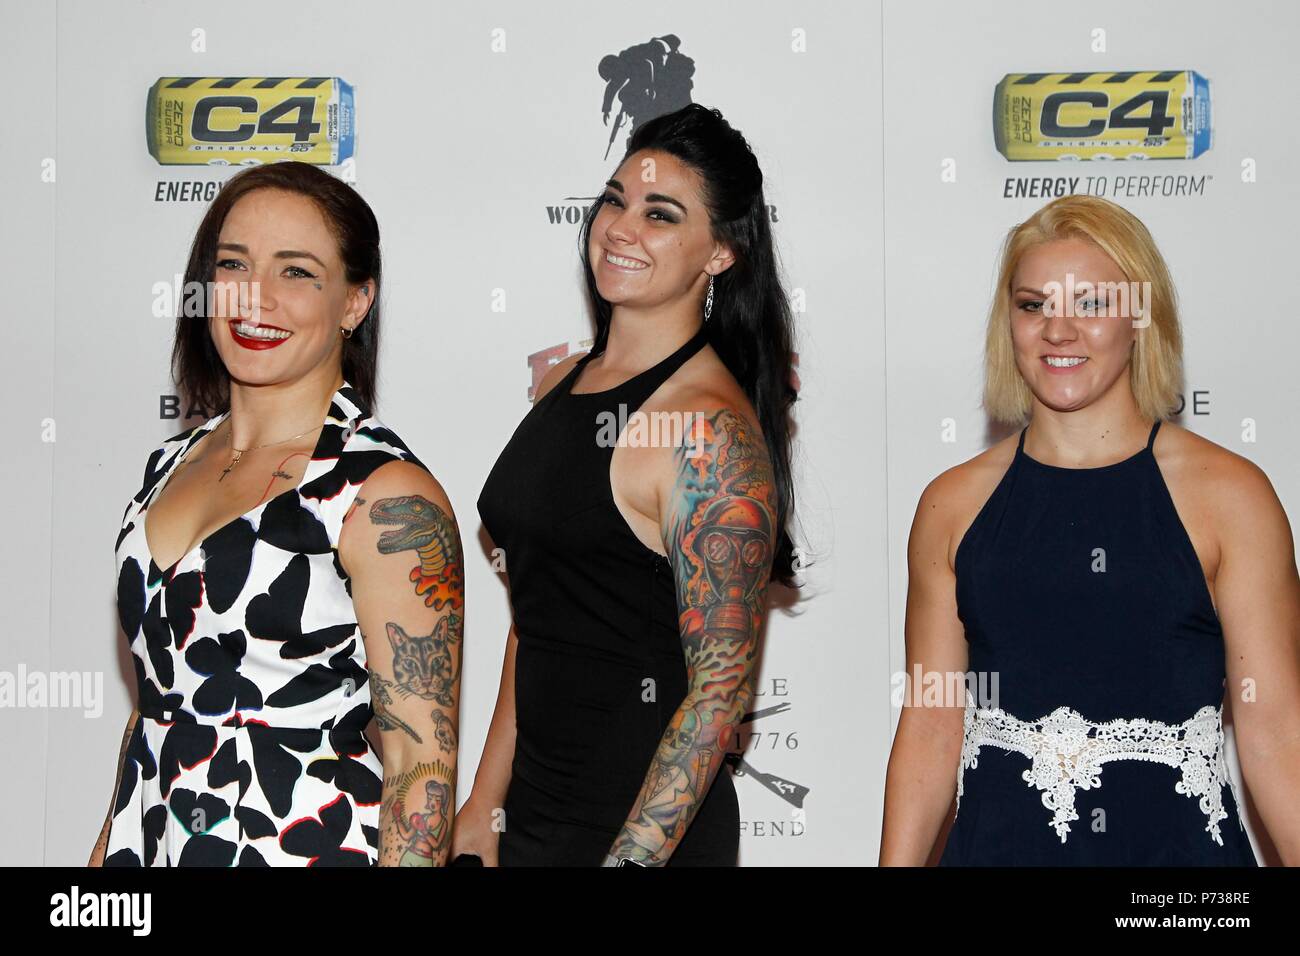 Las Vegas, NV, USA. 3rd July, 2018. Jessica-Rose Clark, Stephanie Michaels, Chelsea Rae at arrivals for 10th Annual Fighters Only World Mixed Martial Arts MMA Awards - Part 2, Palms Casino Resort, Las Vegas, NV July 3, 2018. Credit: JA/Everett Collection/Alamy Live News Stock Photo